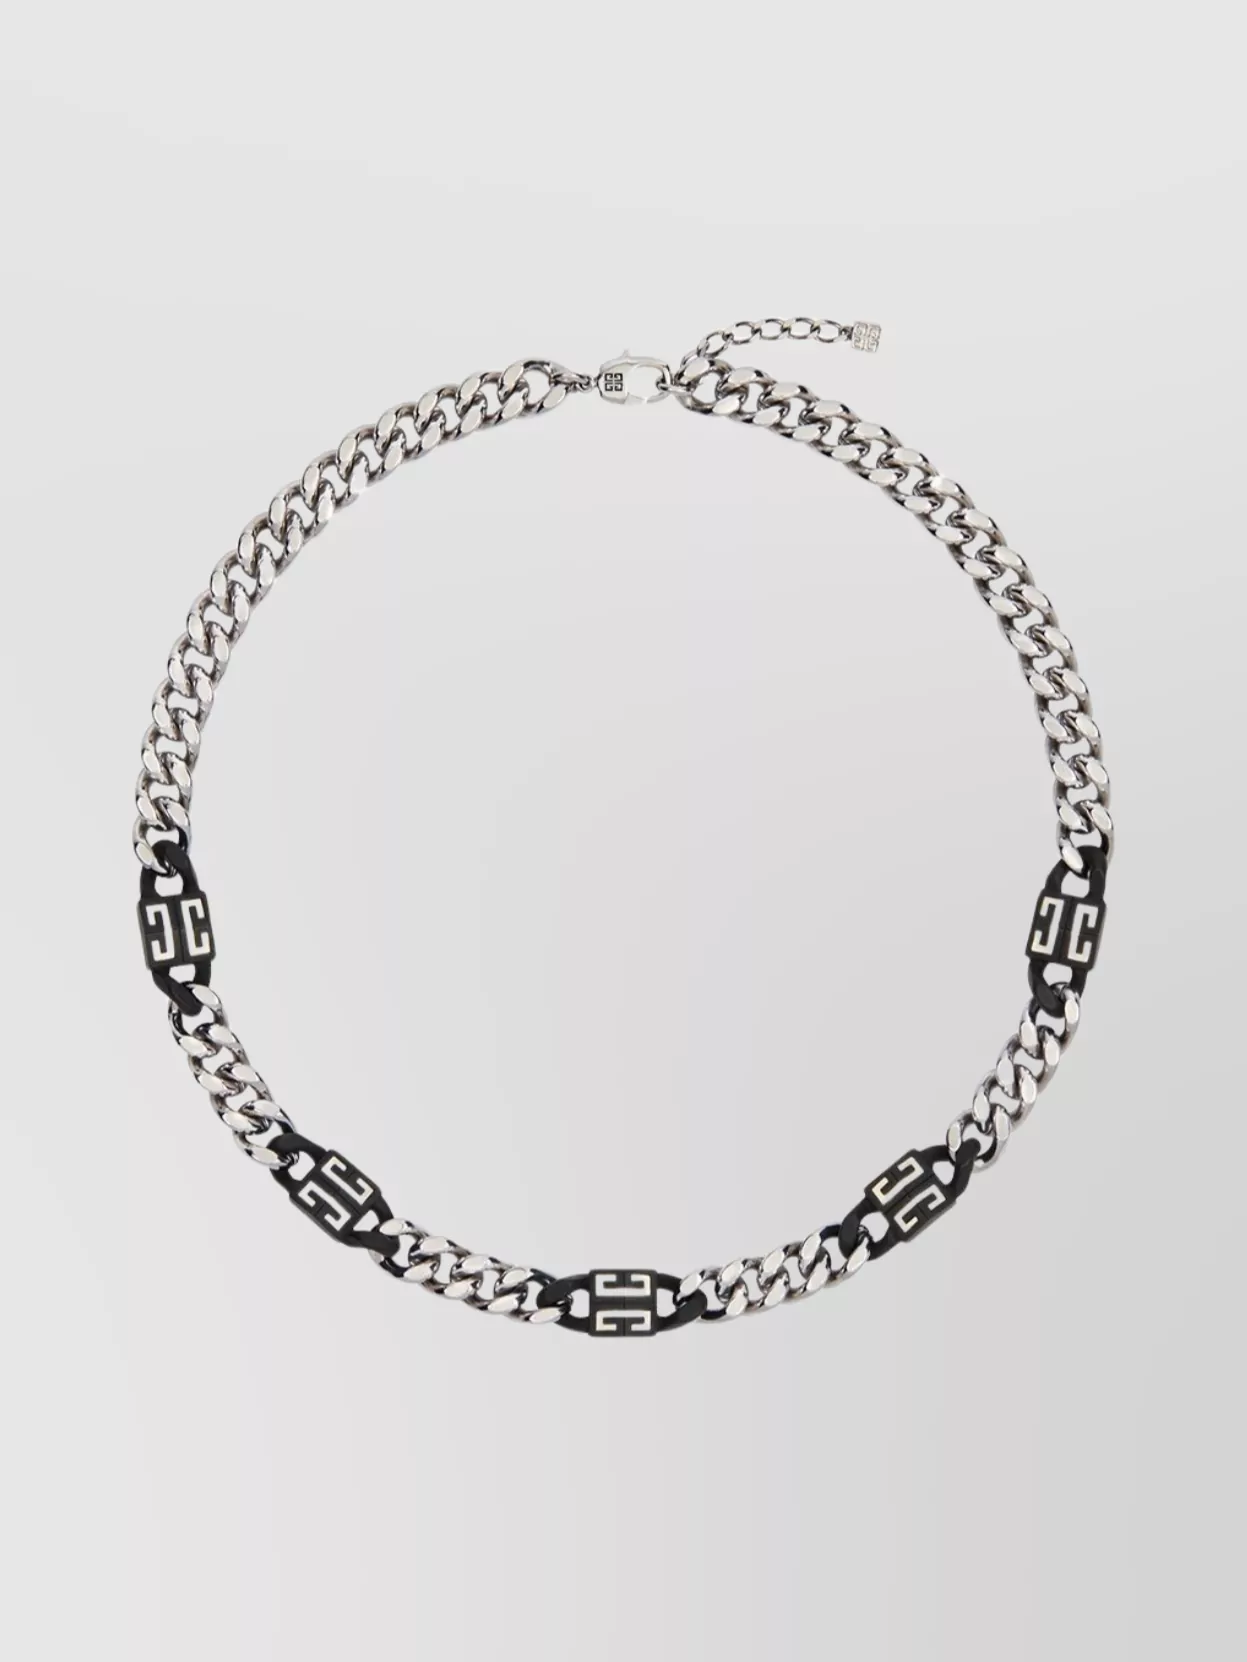 GIVENCHY METAL CHAIN LINK NECKLACE